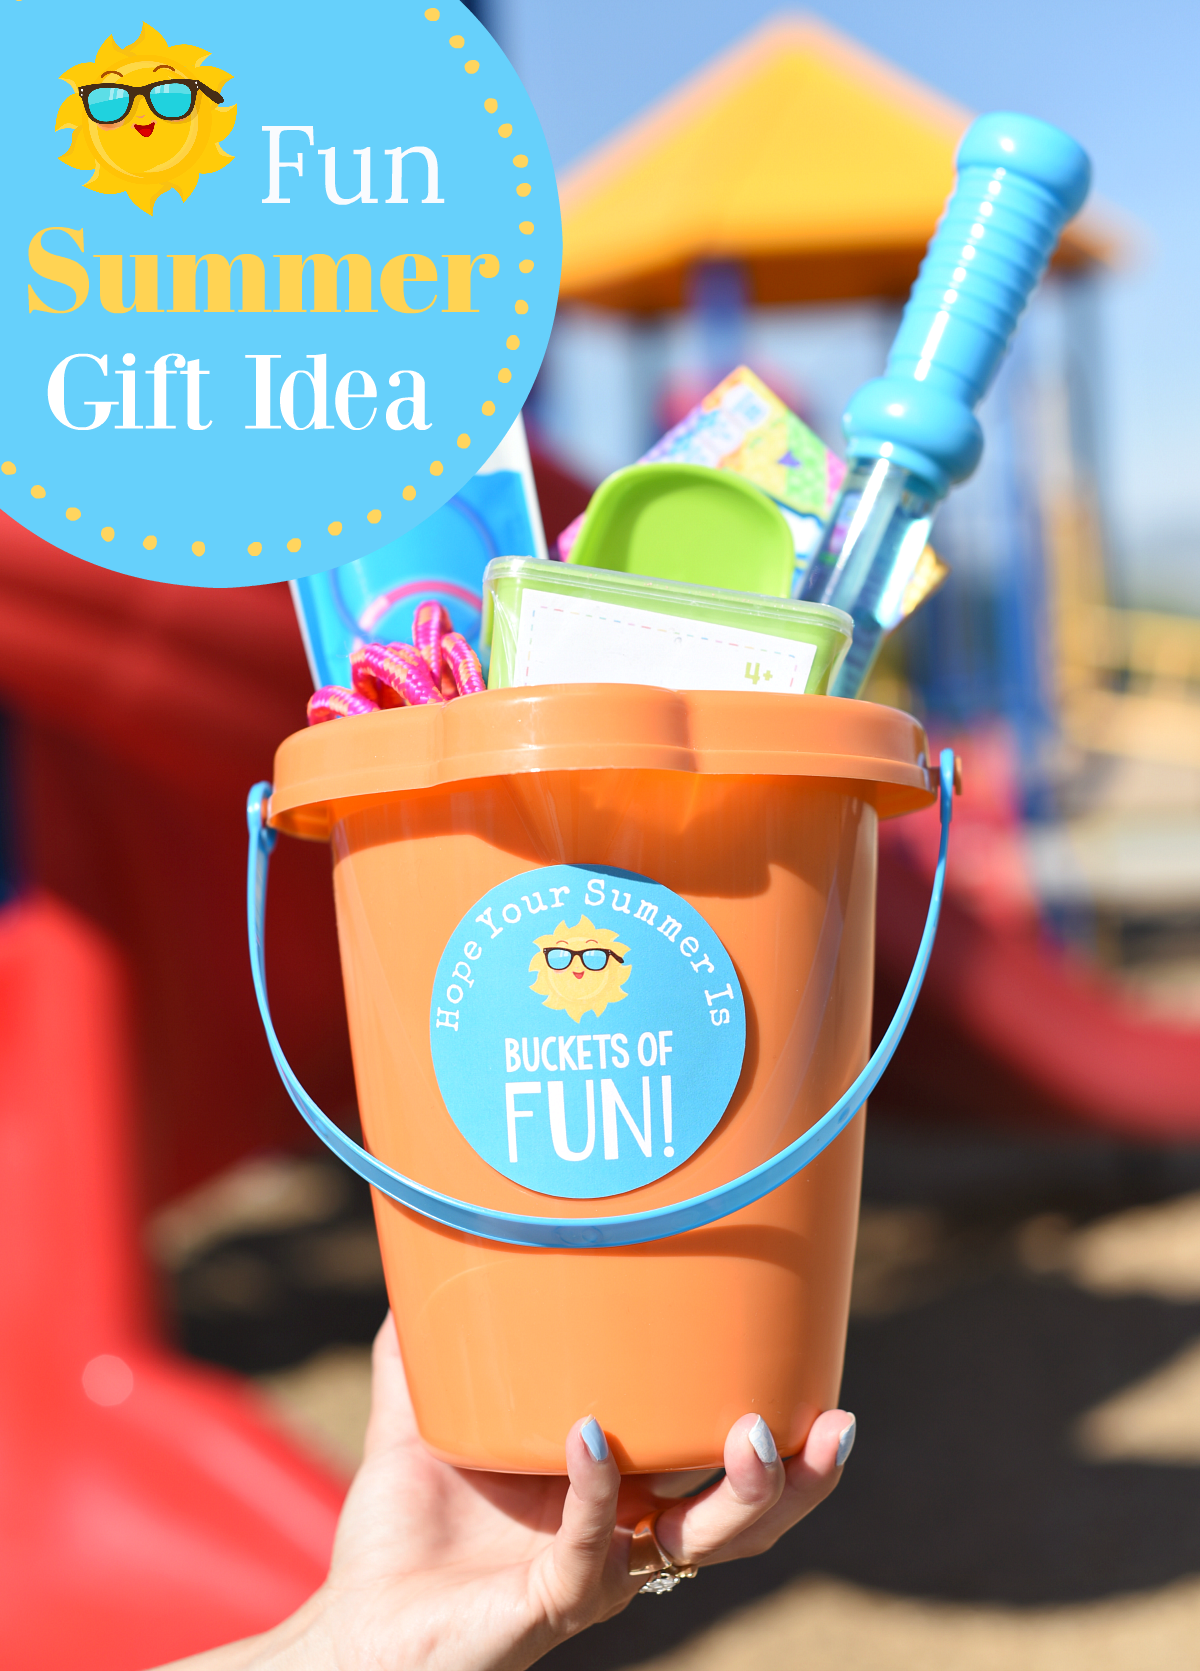 End of the Year Gifts for Students. This fun gift idea is the perfect way to celebrate the beginning of summer. #fungifts #fungiftideas #summer #summergifts